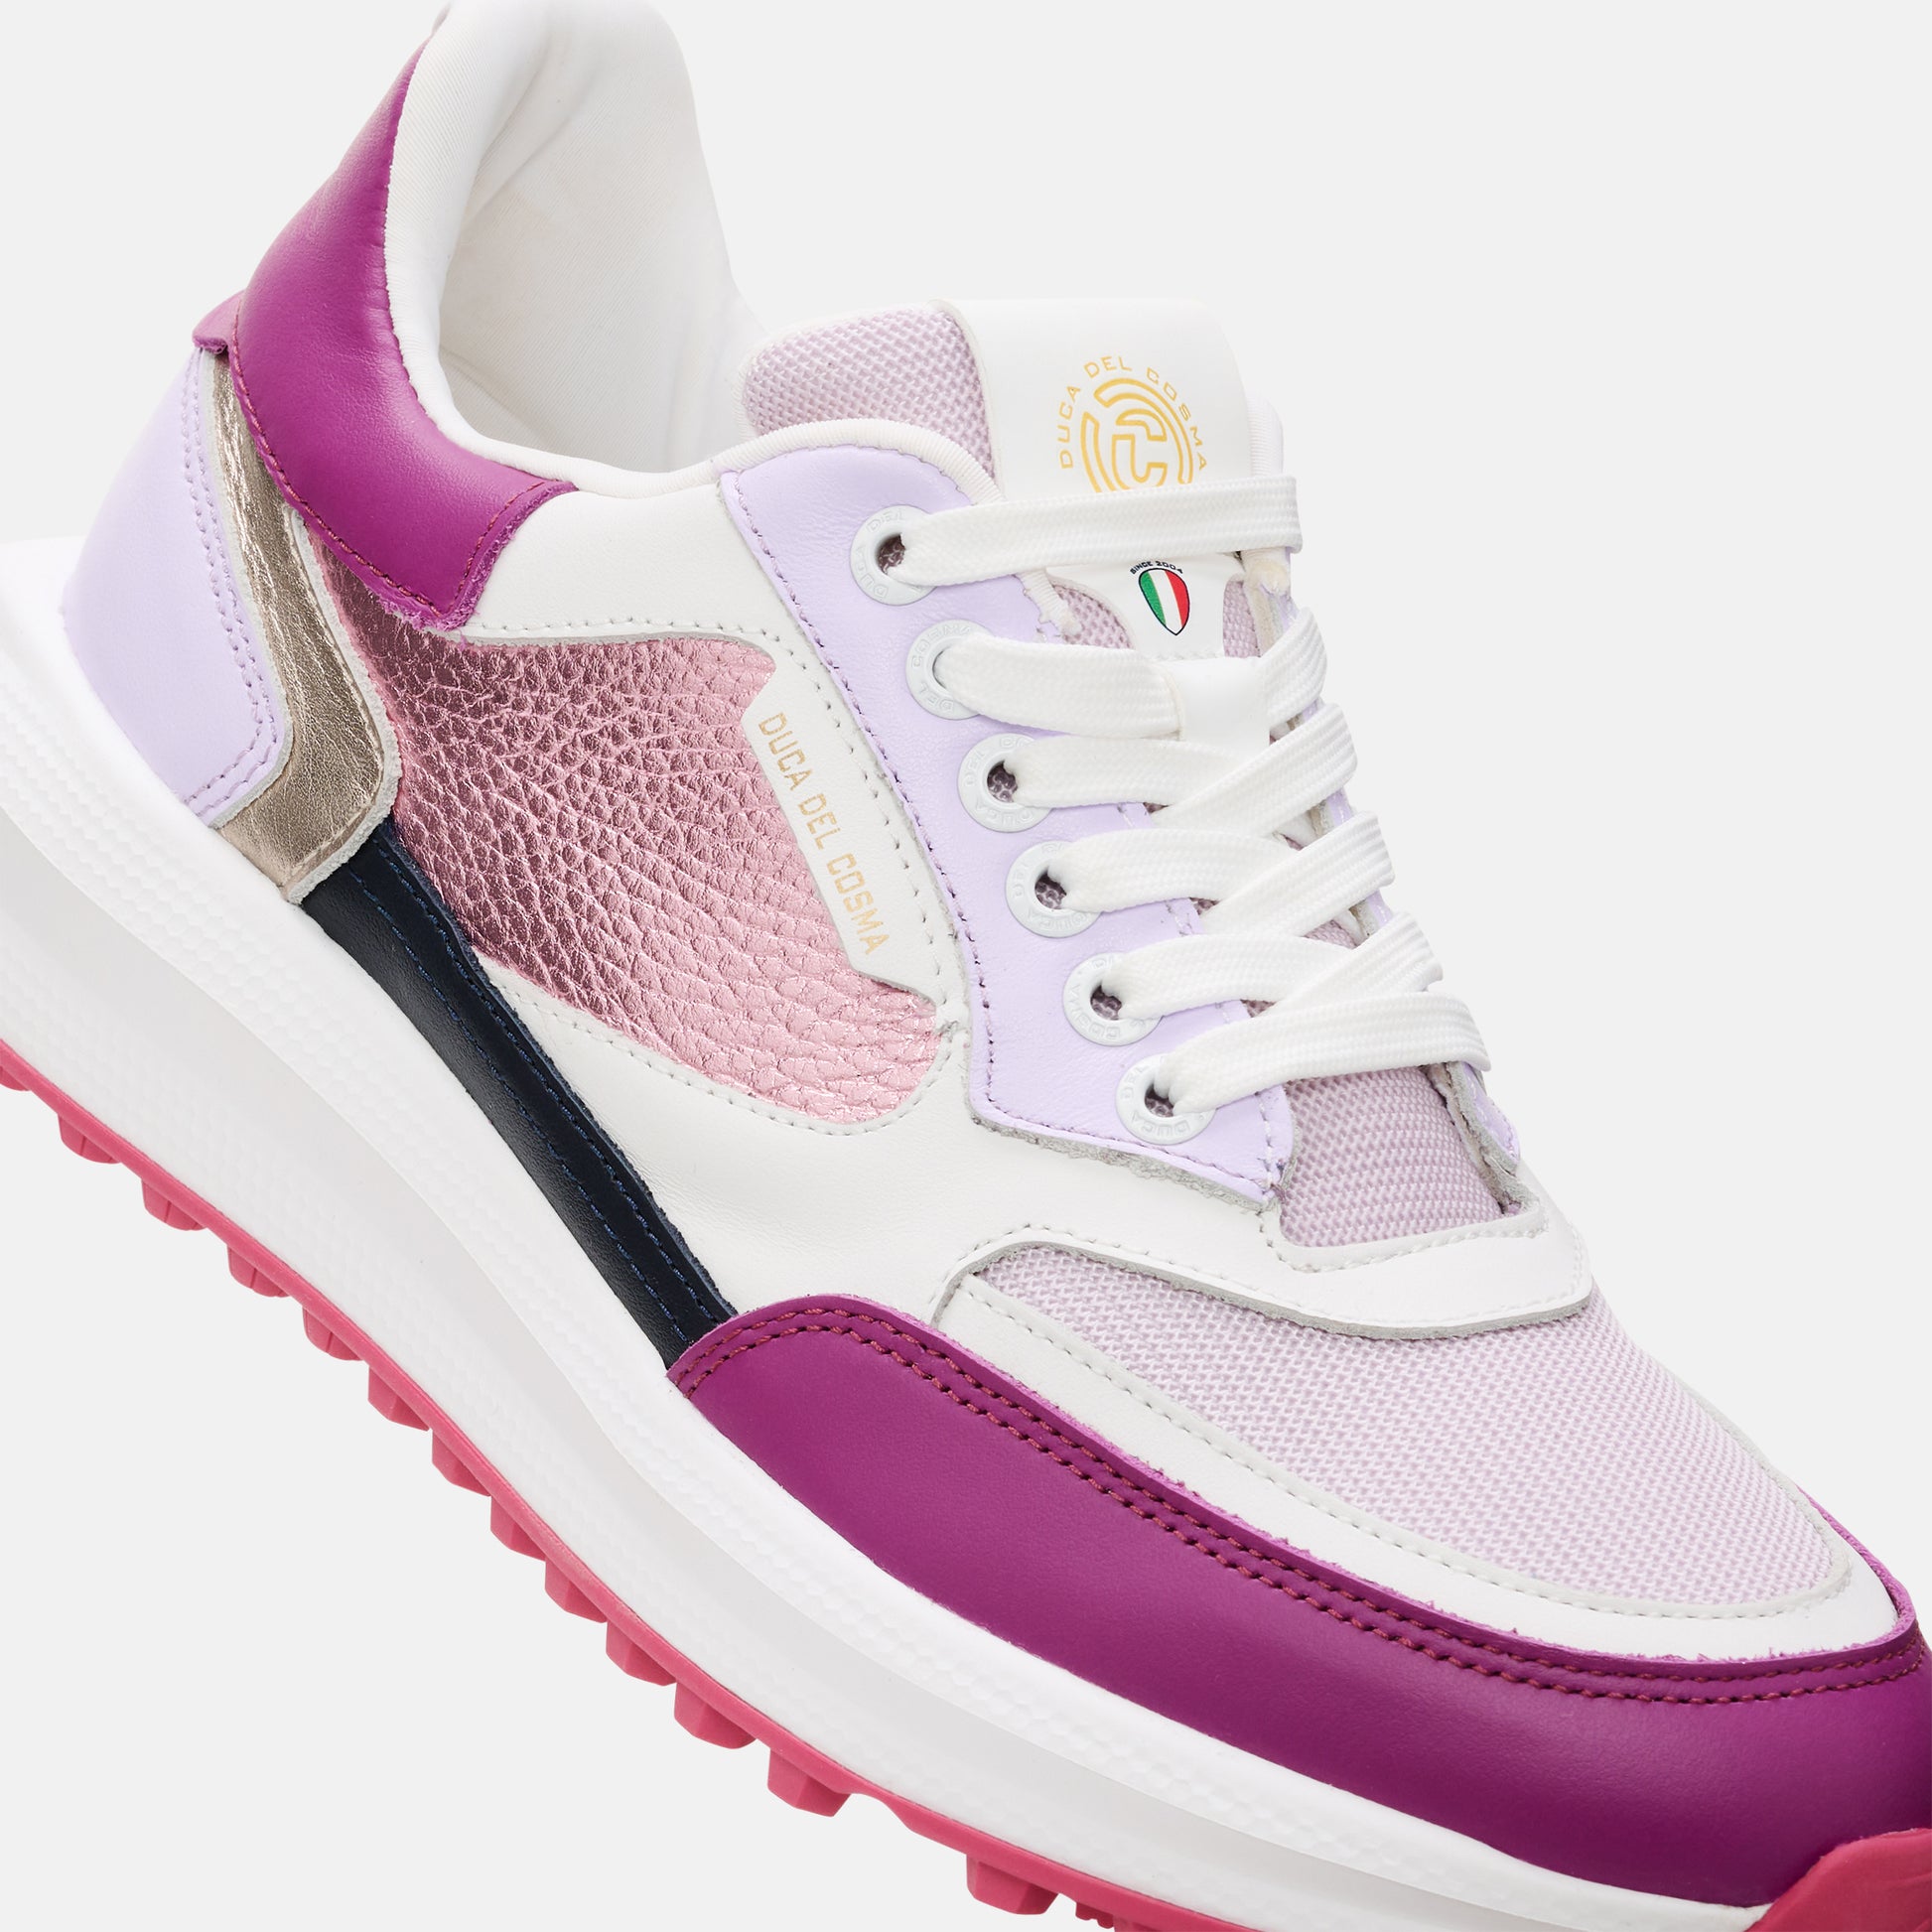 Purple Golf Shoes, Pink Golf Shoes, Lightweight Women's Golf Shoes Duca del Cosma, Spikeless Golf Shoes, Waterproof Golf Shoes.